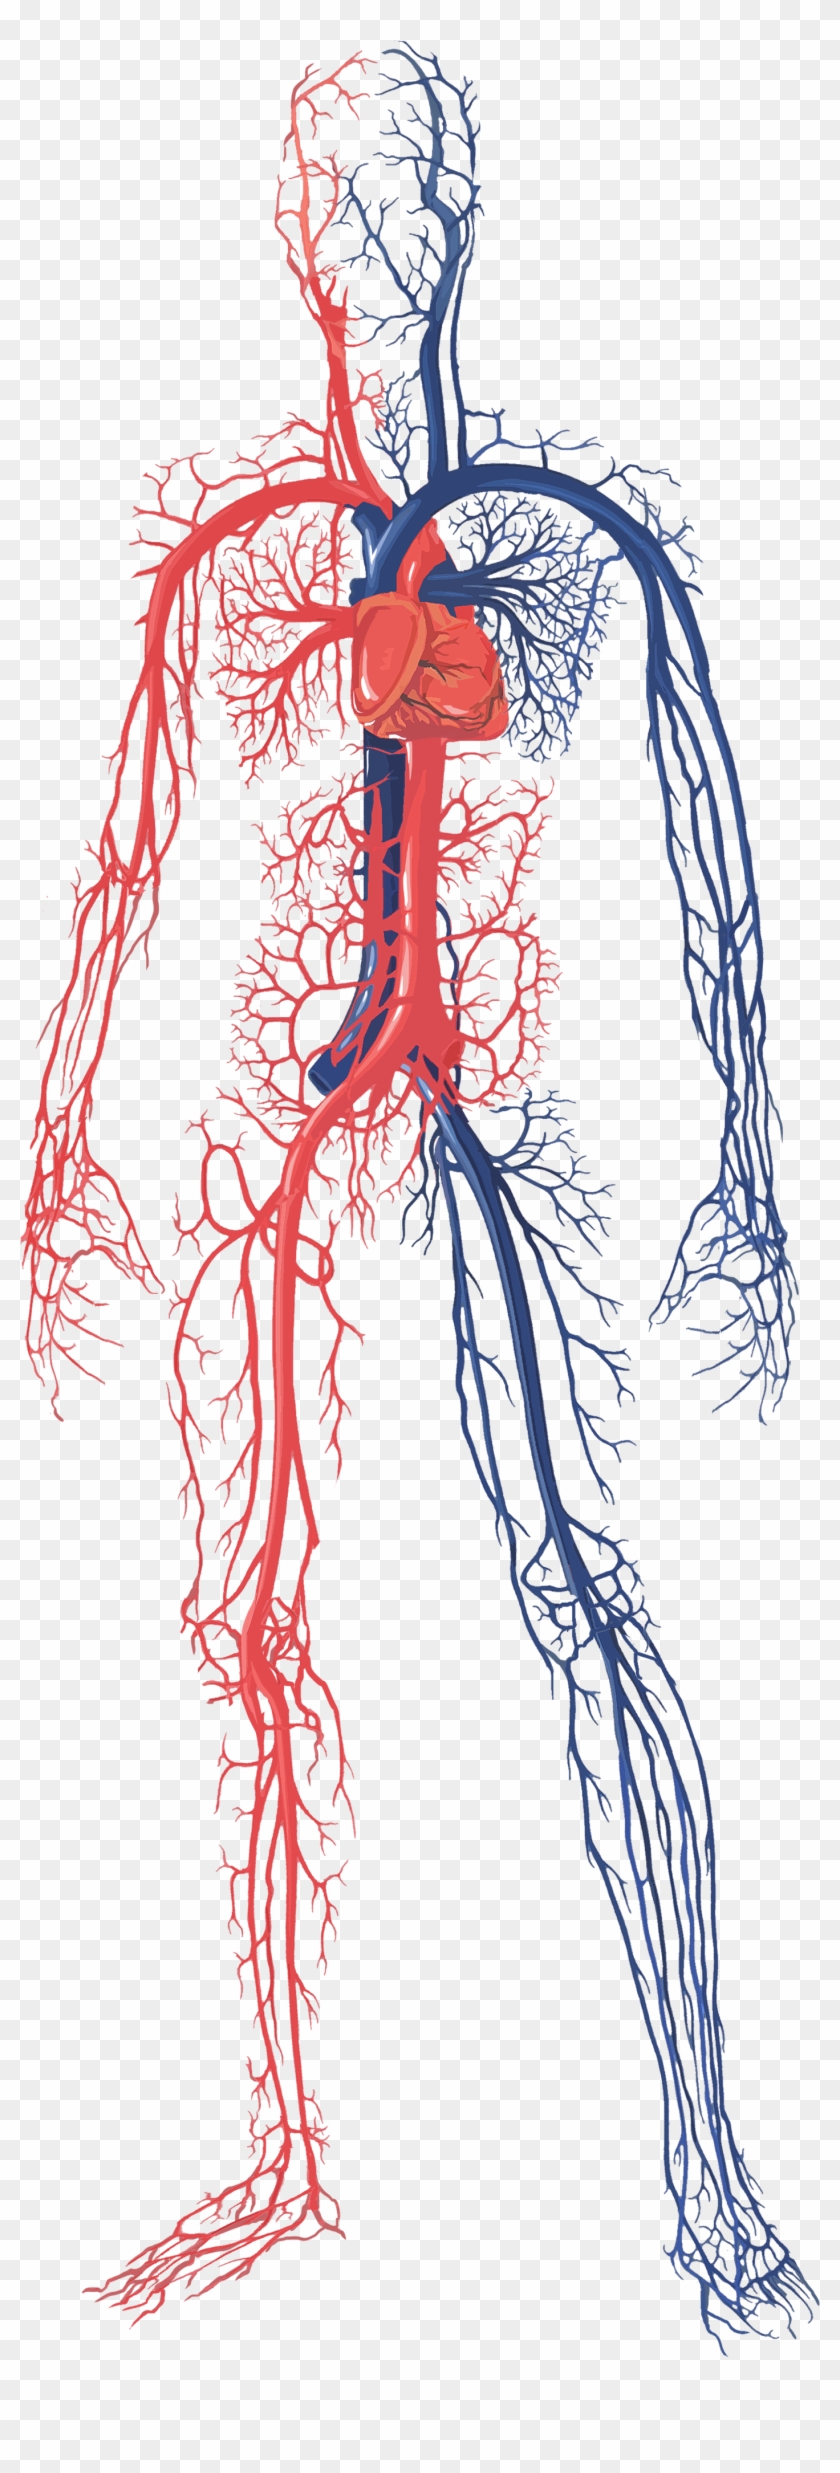 Female Circulatory System - Arteries And Veins Heart And Lungs Clipart #2406616